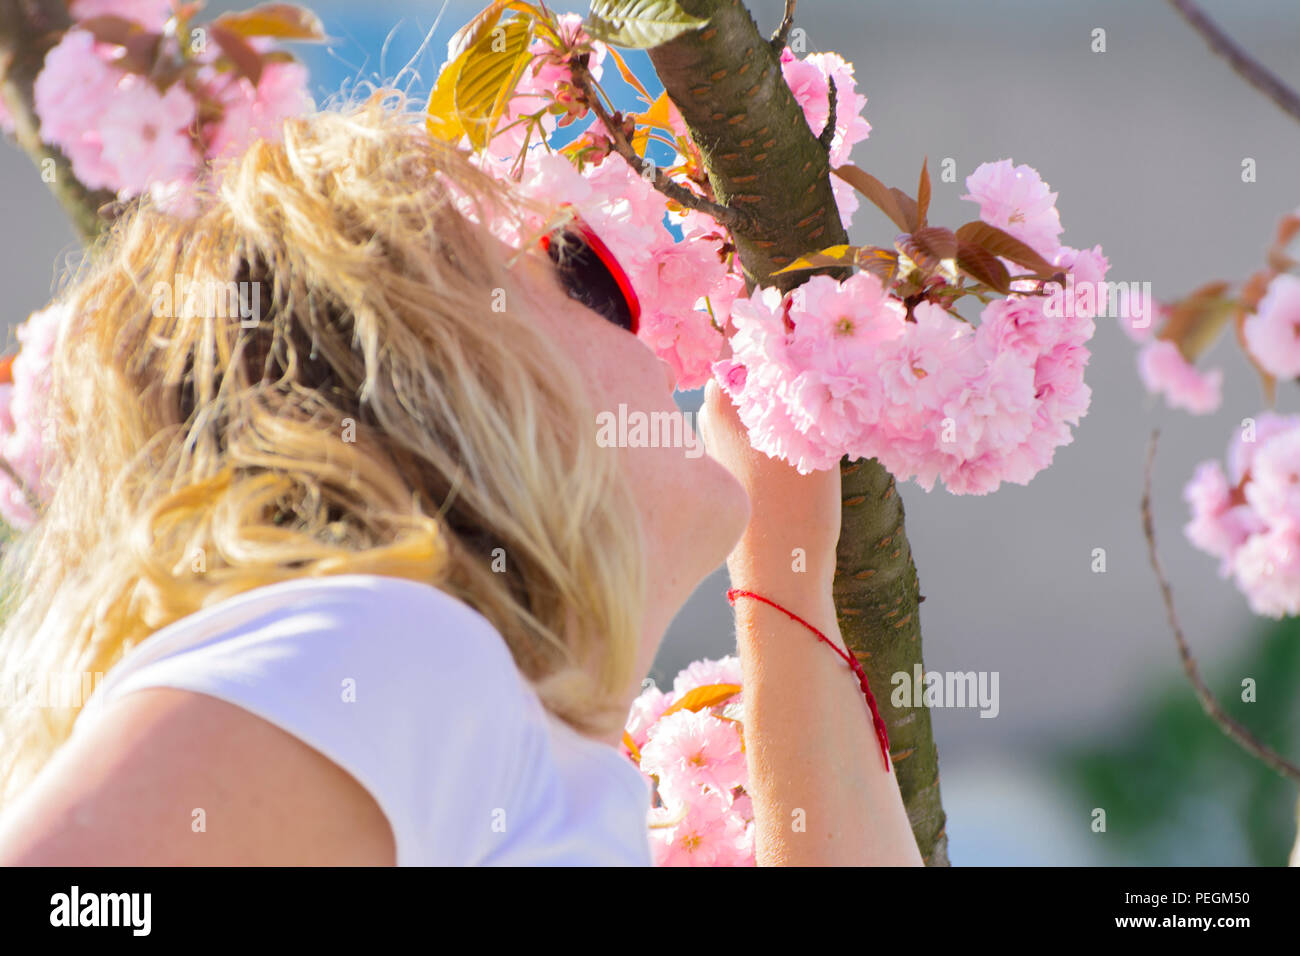 Woman and cherry blossom or Sakura flower on a tree branch against a blue sky background. Japanese cherry. Shallow depth of field. Focus on the center Stock Photo